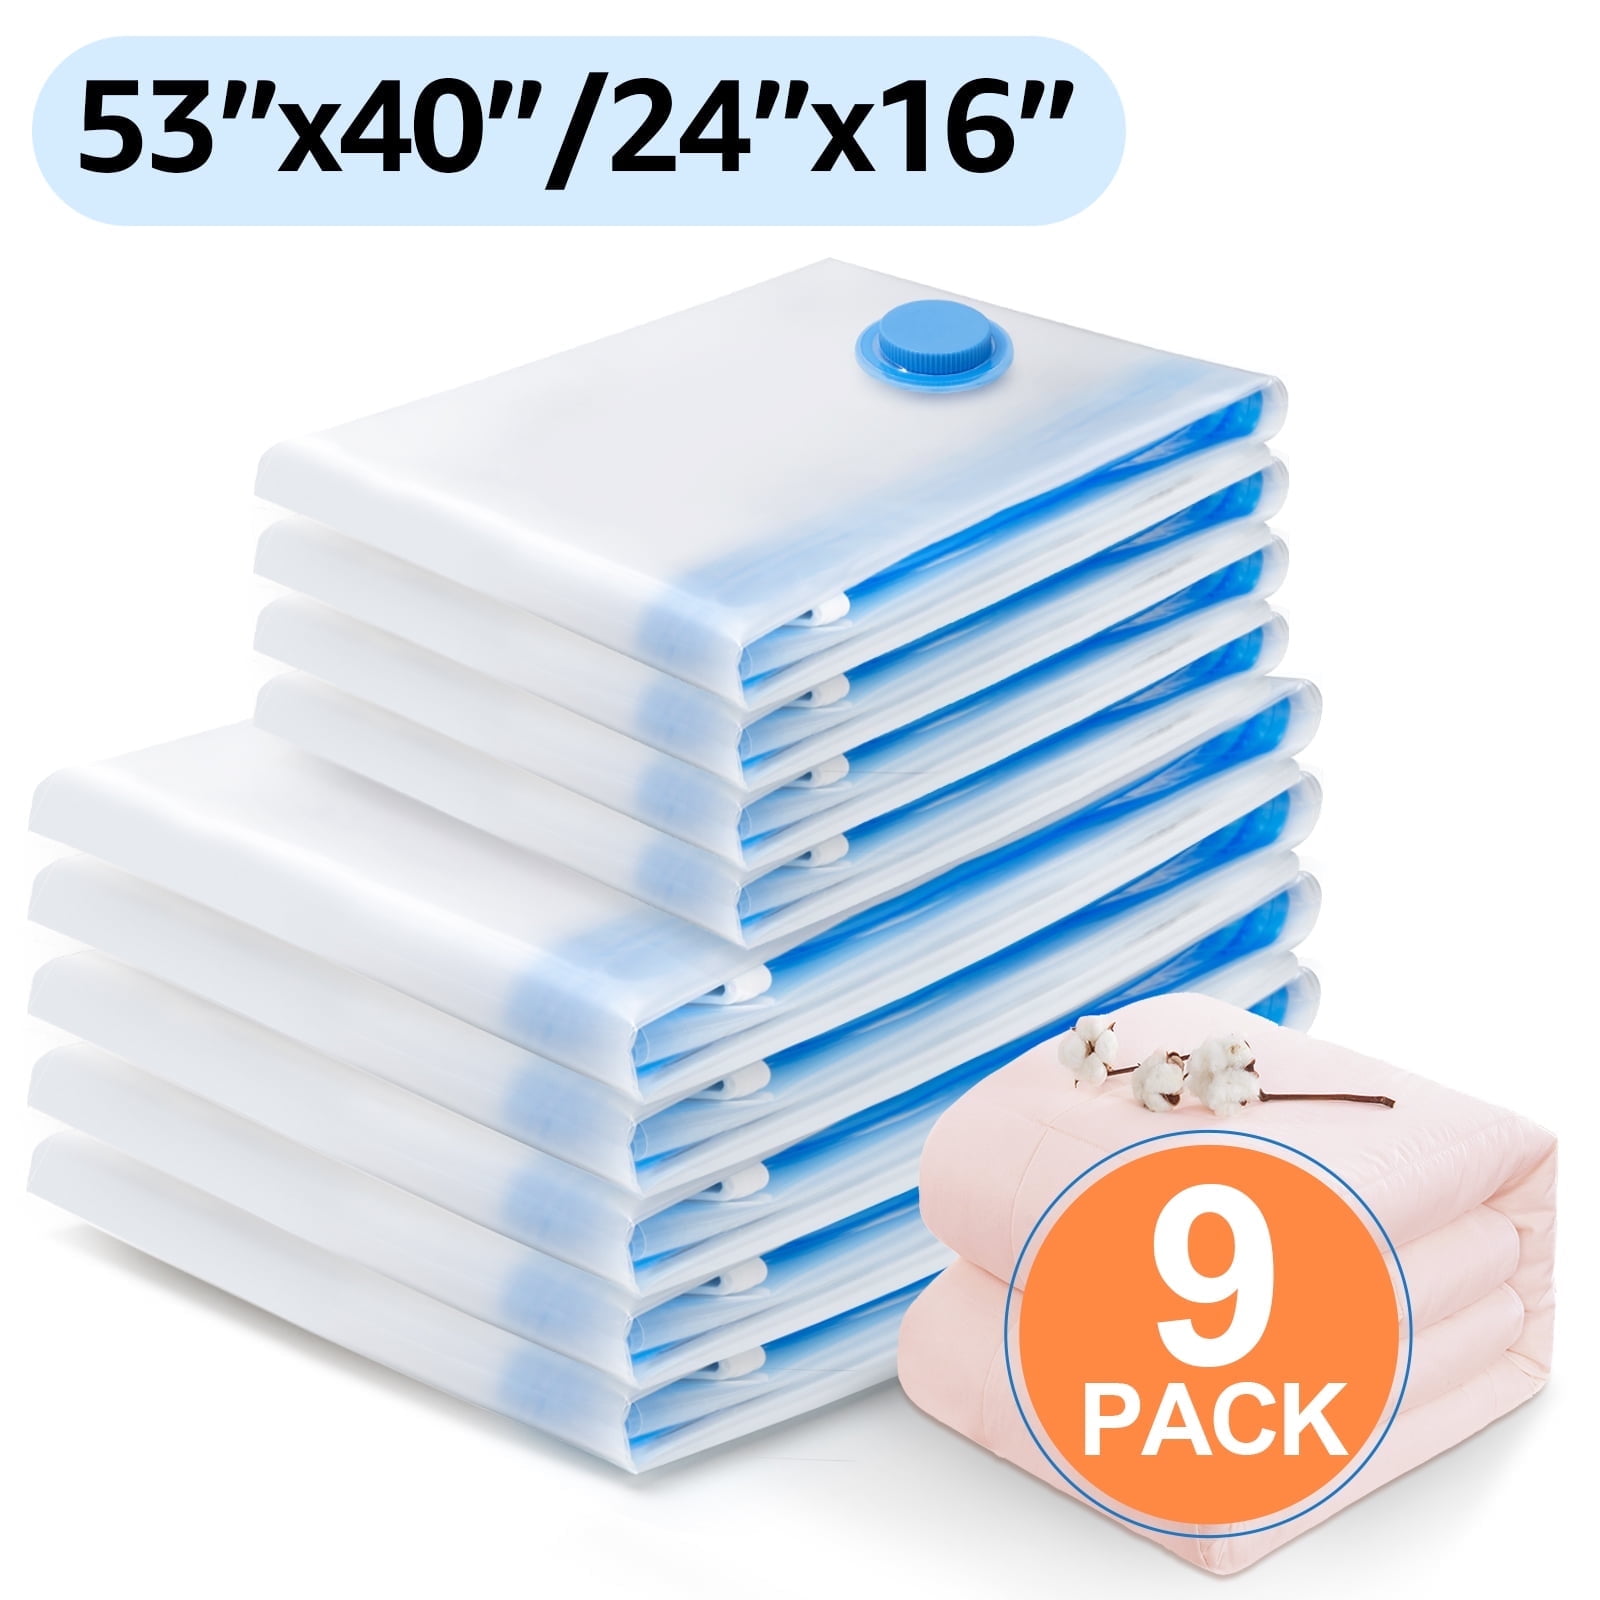 Pac N Stack Handheld Vacuum Sealing Storage with Bags, 4 Pack, Air-Tight  Storage Bags, Sealing Storage Bags Are Reusable Waterproof, Saves Space and  Organizes, Great For Packing, Reduces Volume 